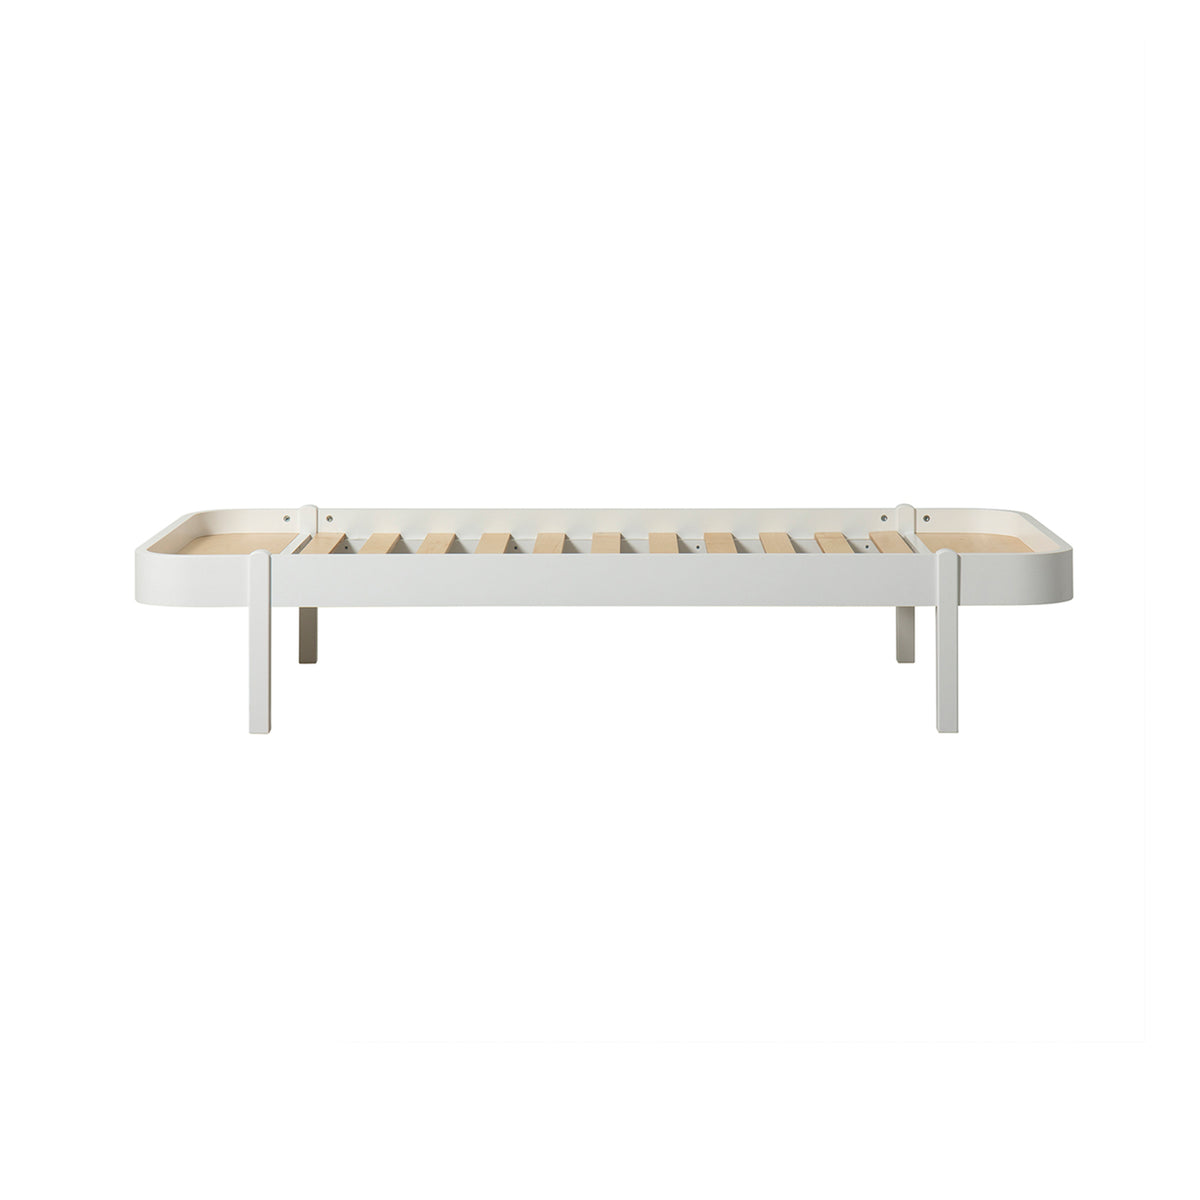 Wood Lounger Bed - 90cm